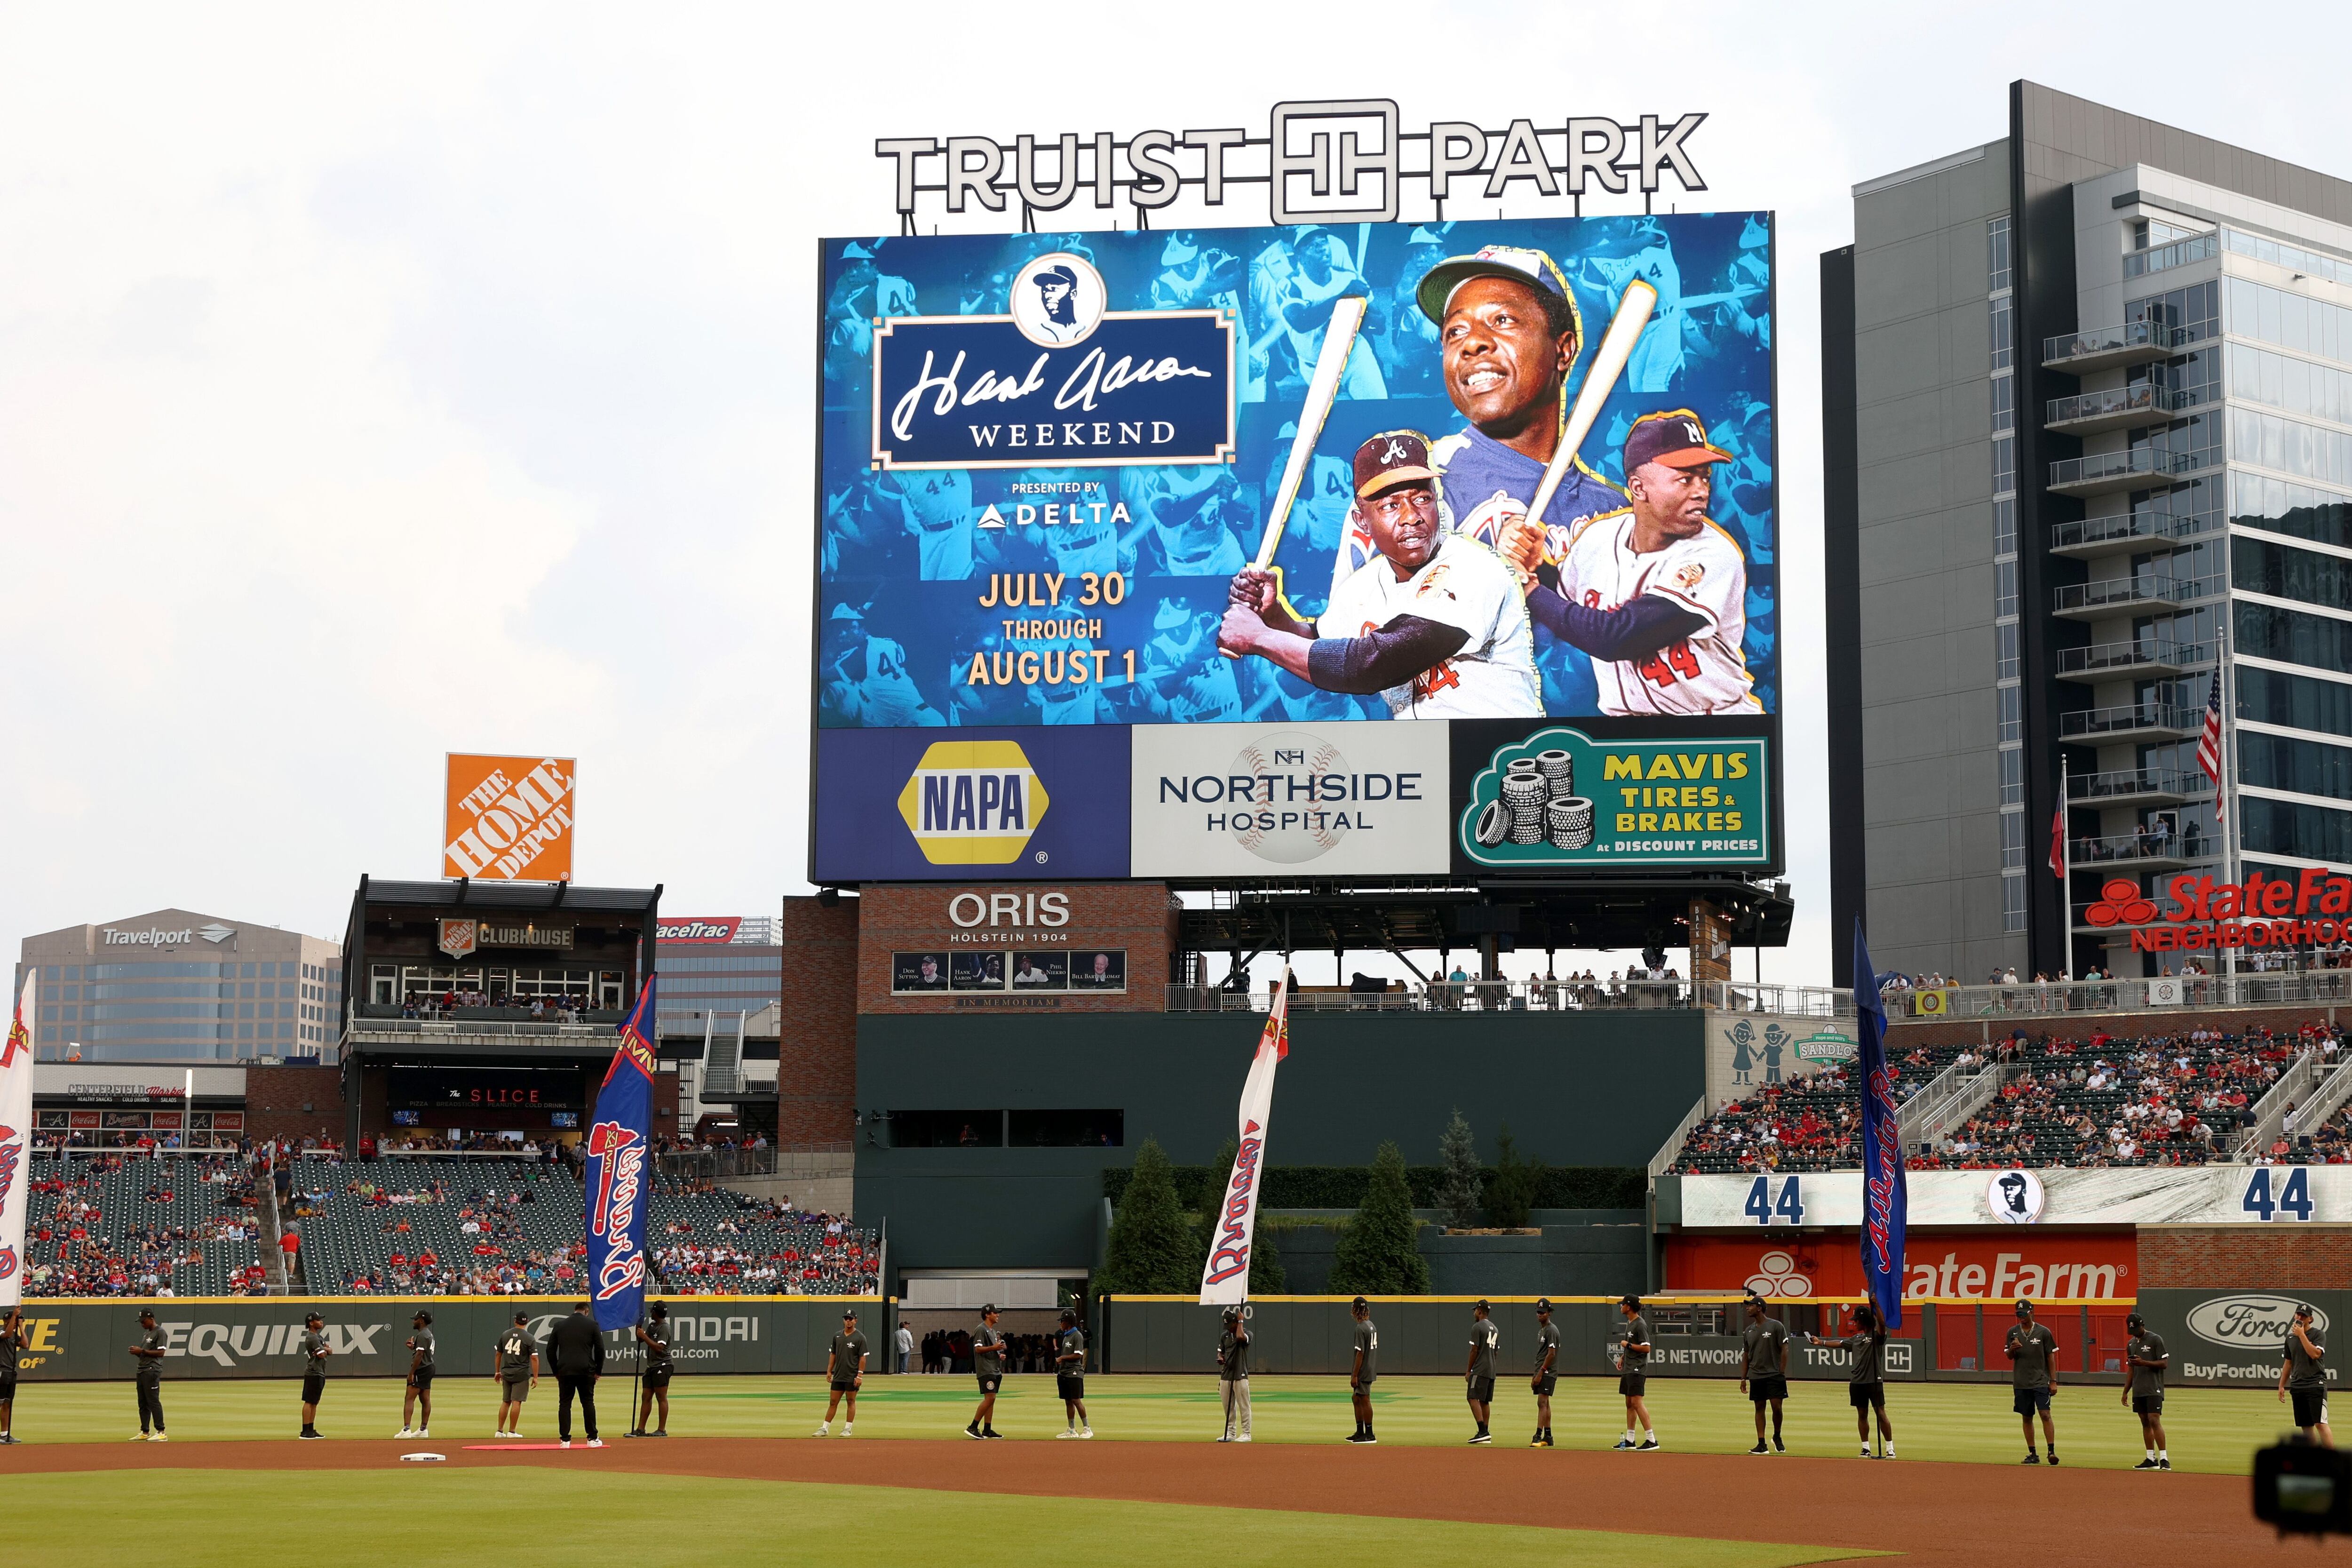 Braves Retail on X: It's Hank Aaron Weekend at @TruistPark! The